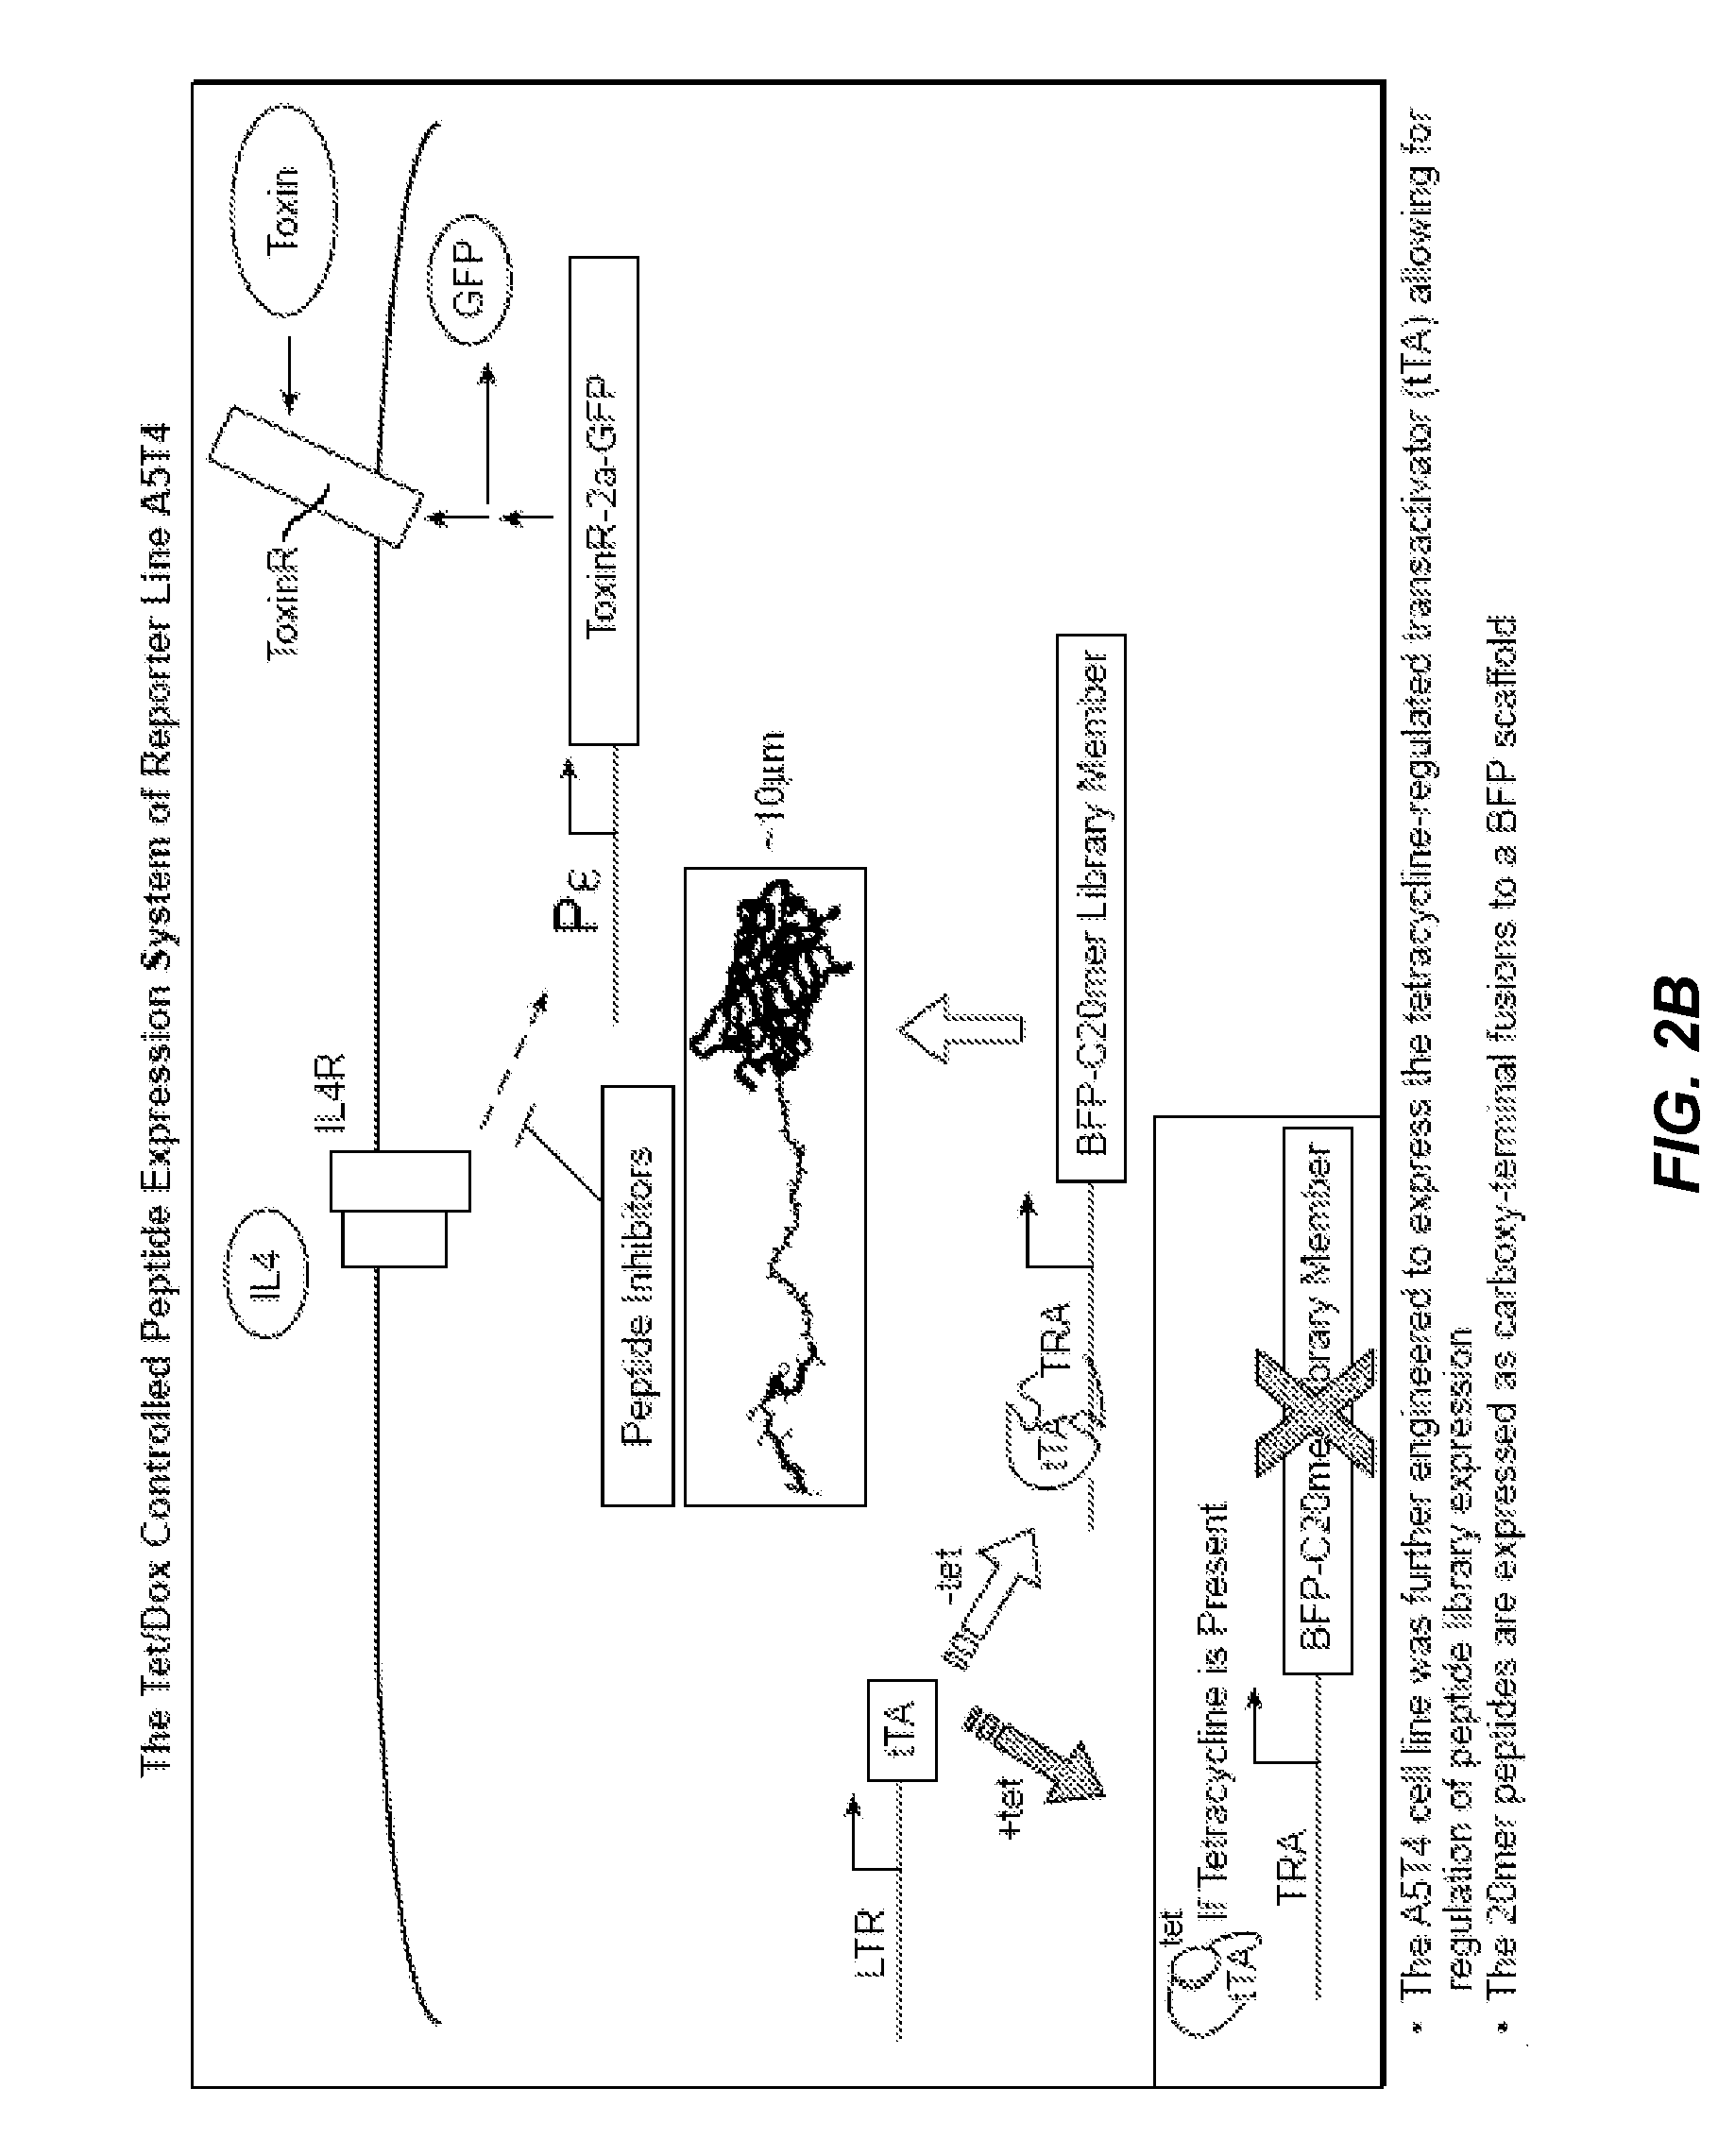 Methods of Identifying Compounds that Modulate IL-4 Receptor-Mediated IgE Synthesis Utilizing an Adenosine Kinase